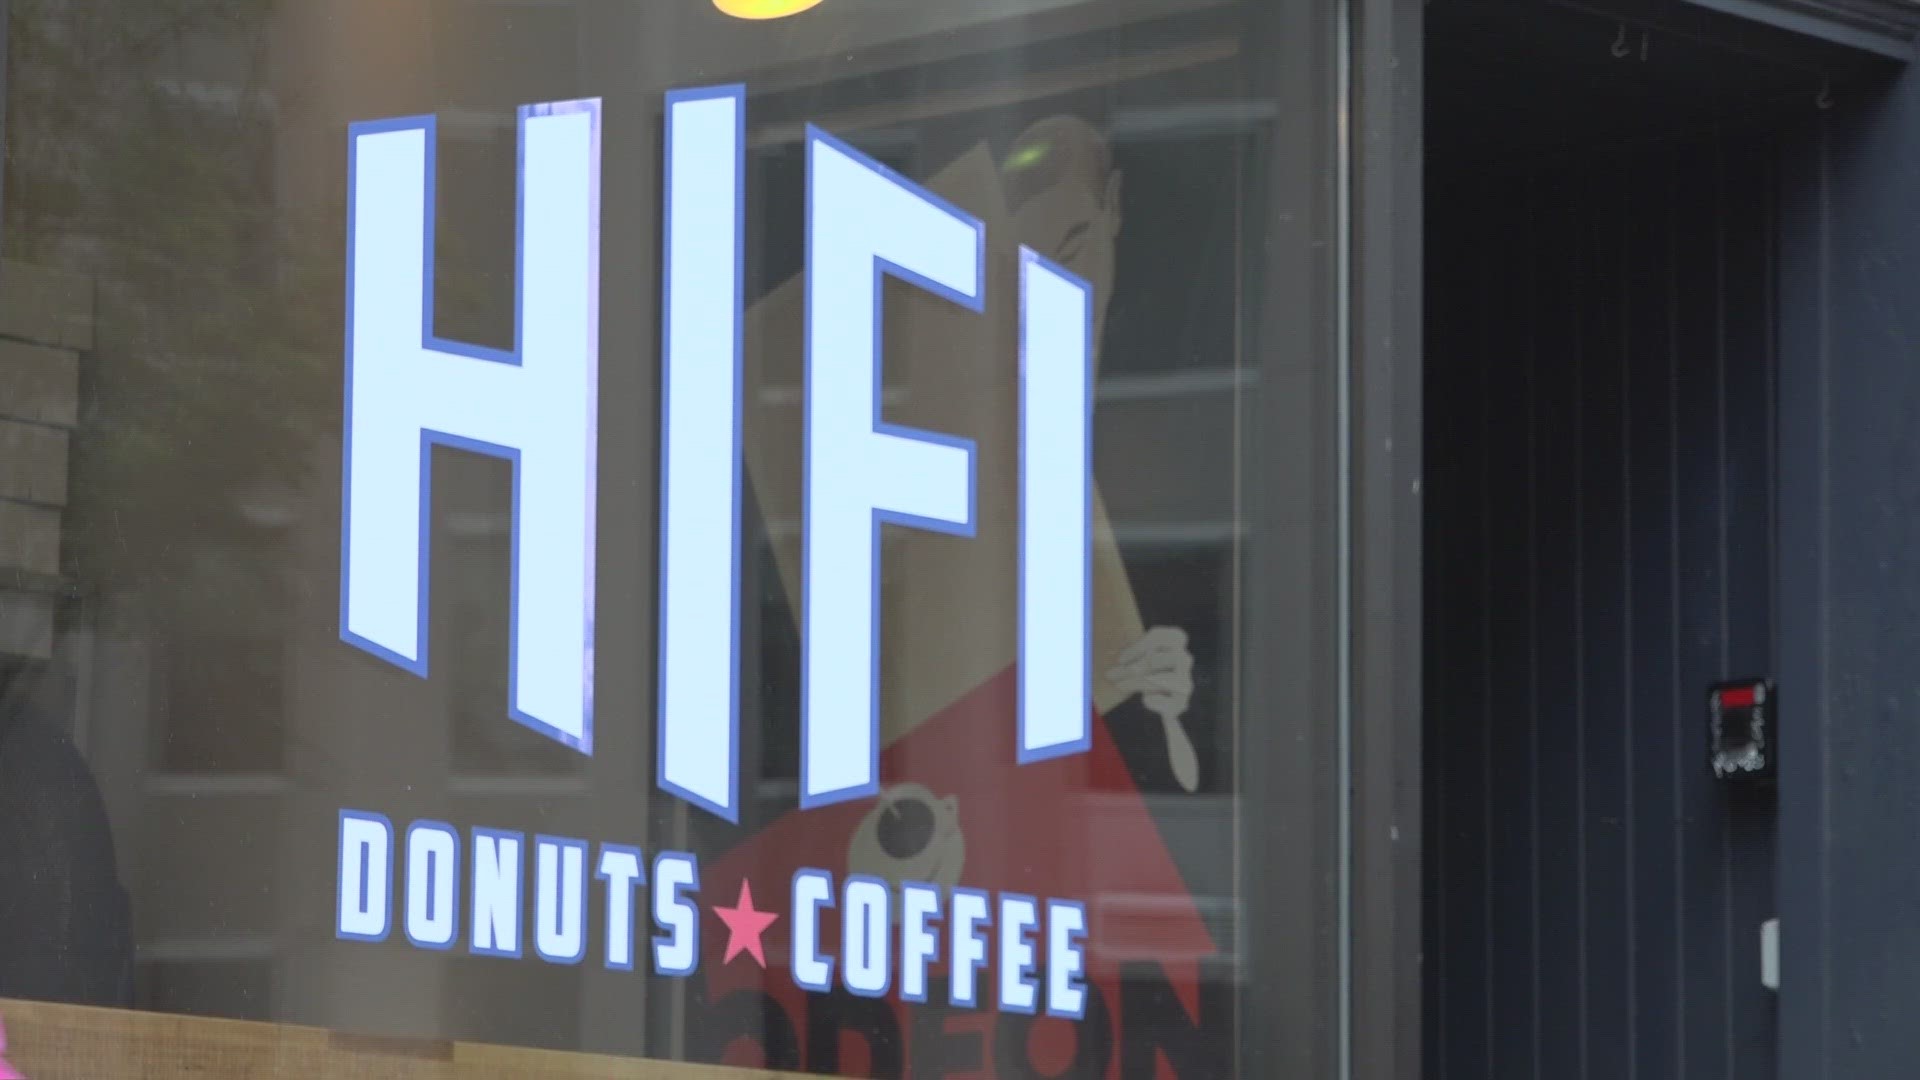 Portland Public Works plans to deliver the bench back to Hifi Donuts Wednesday morning.